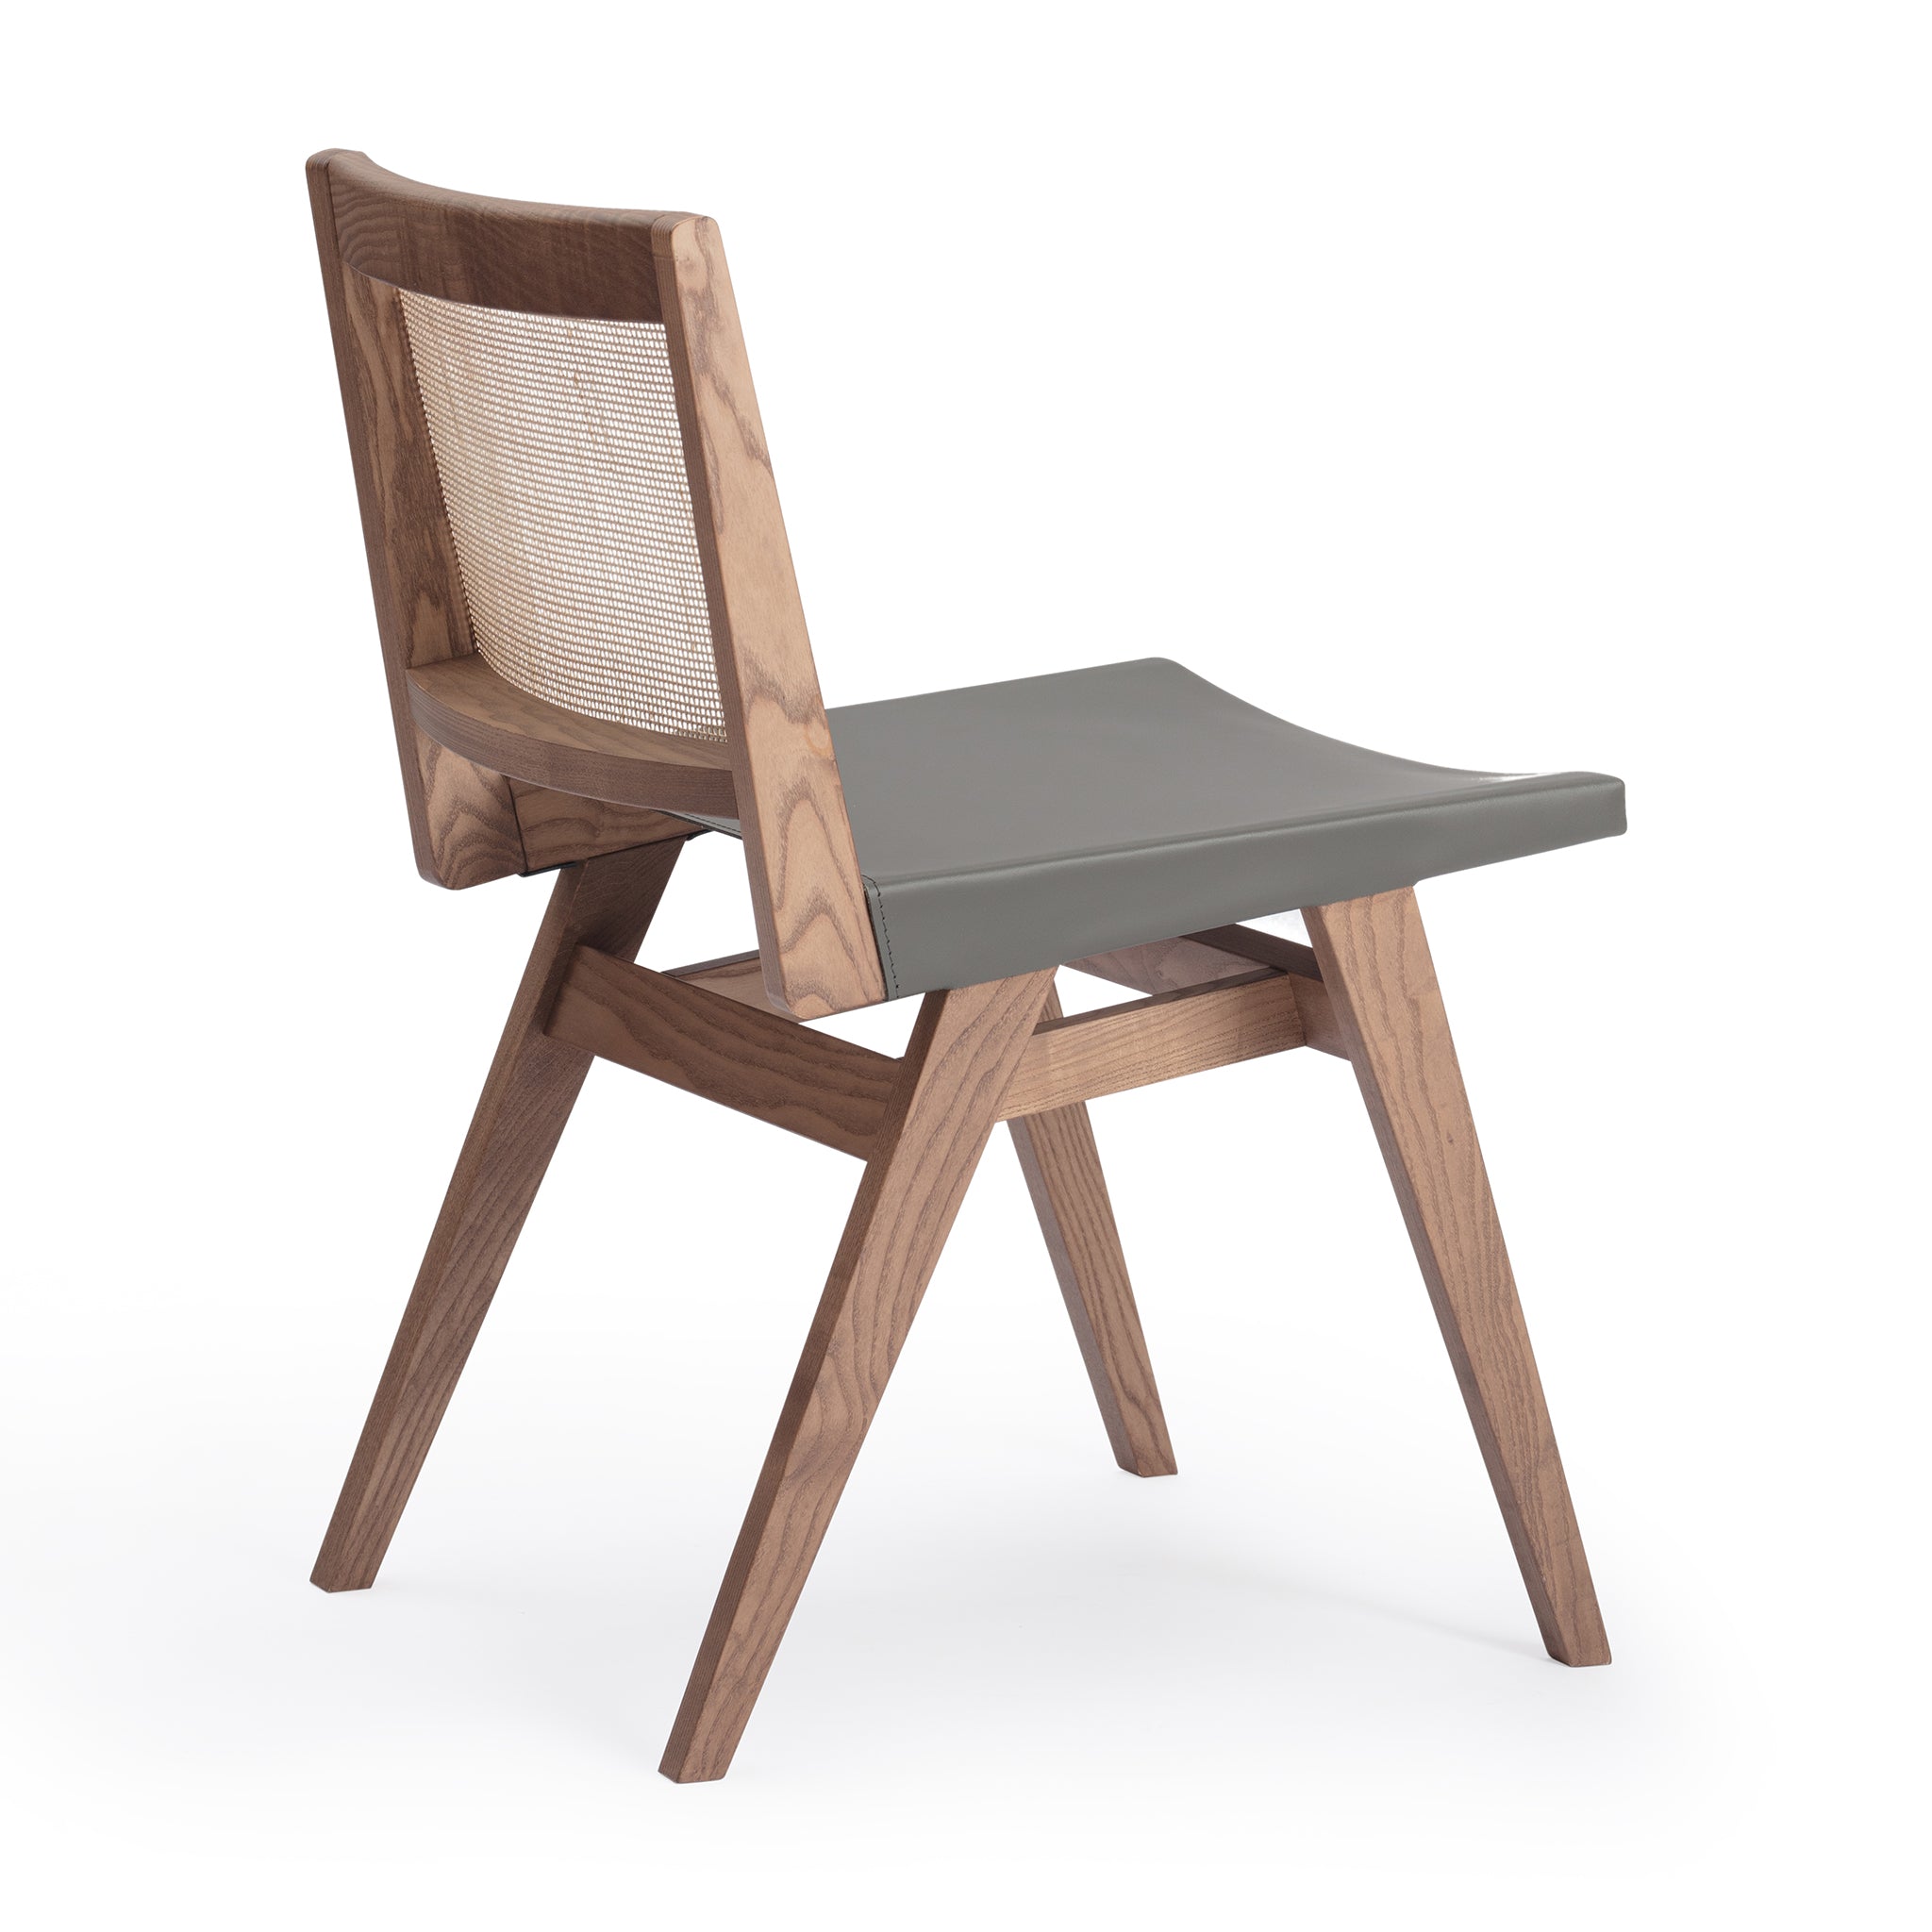 Back view of an "Elye" modern dining chair, walnut stained ash frame, square weave cane back, contract grade off white leather seat, produced by Klarel in Italy. #K41-2